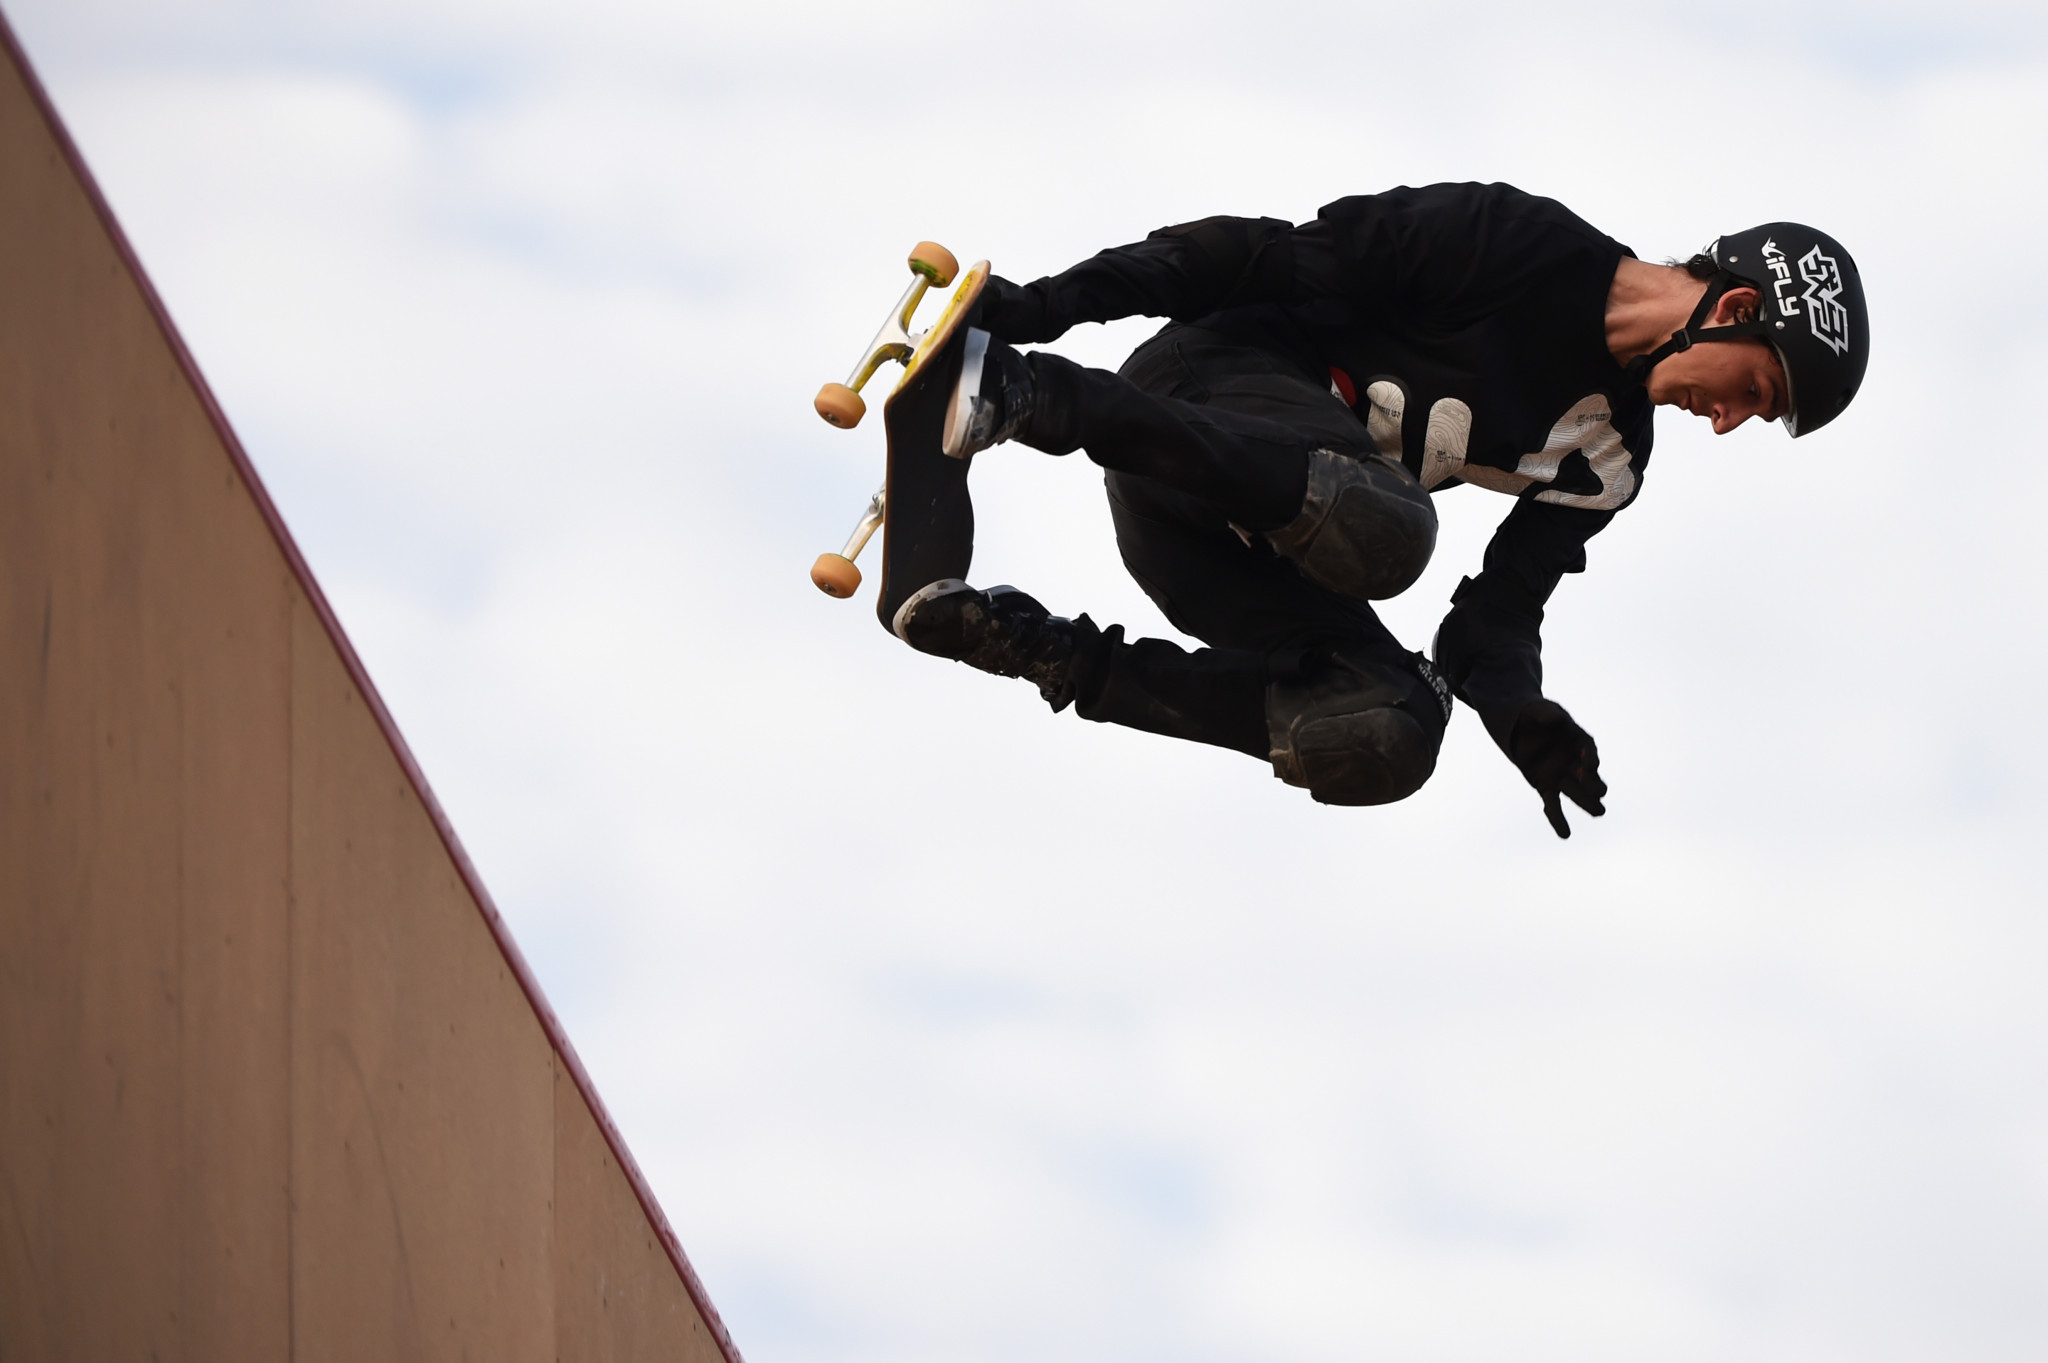 Summer X Games prepare to return to Minneapolis for third successive year